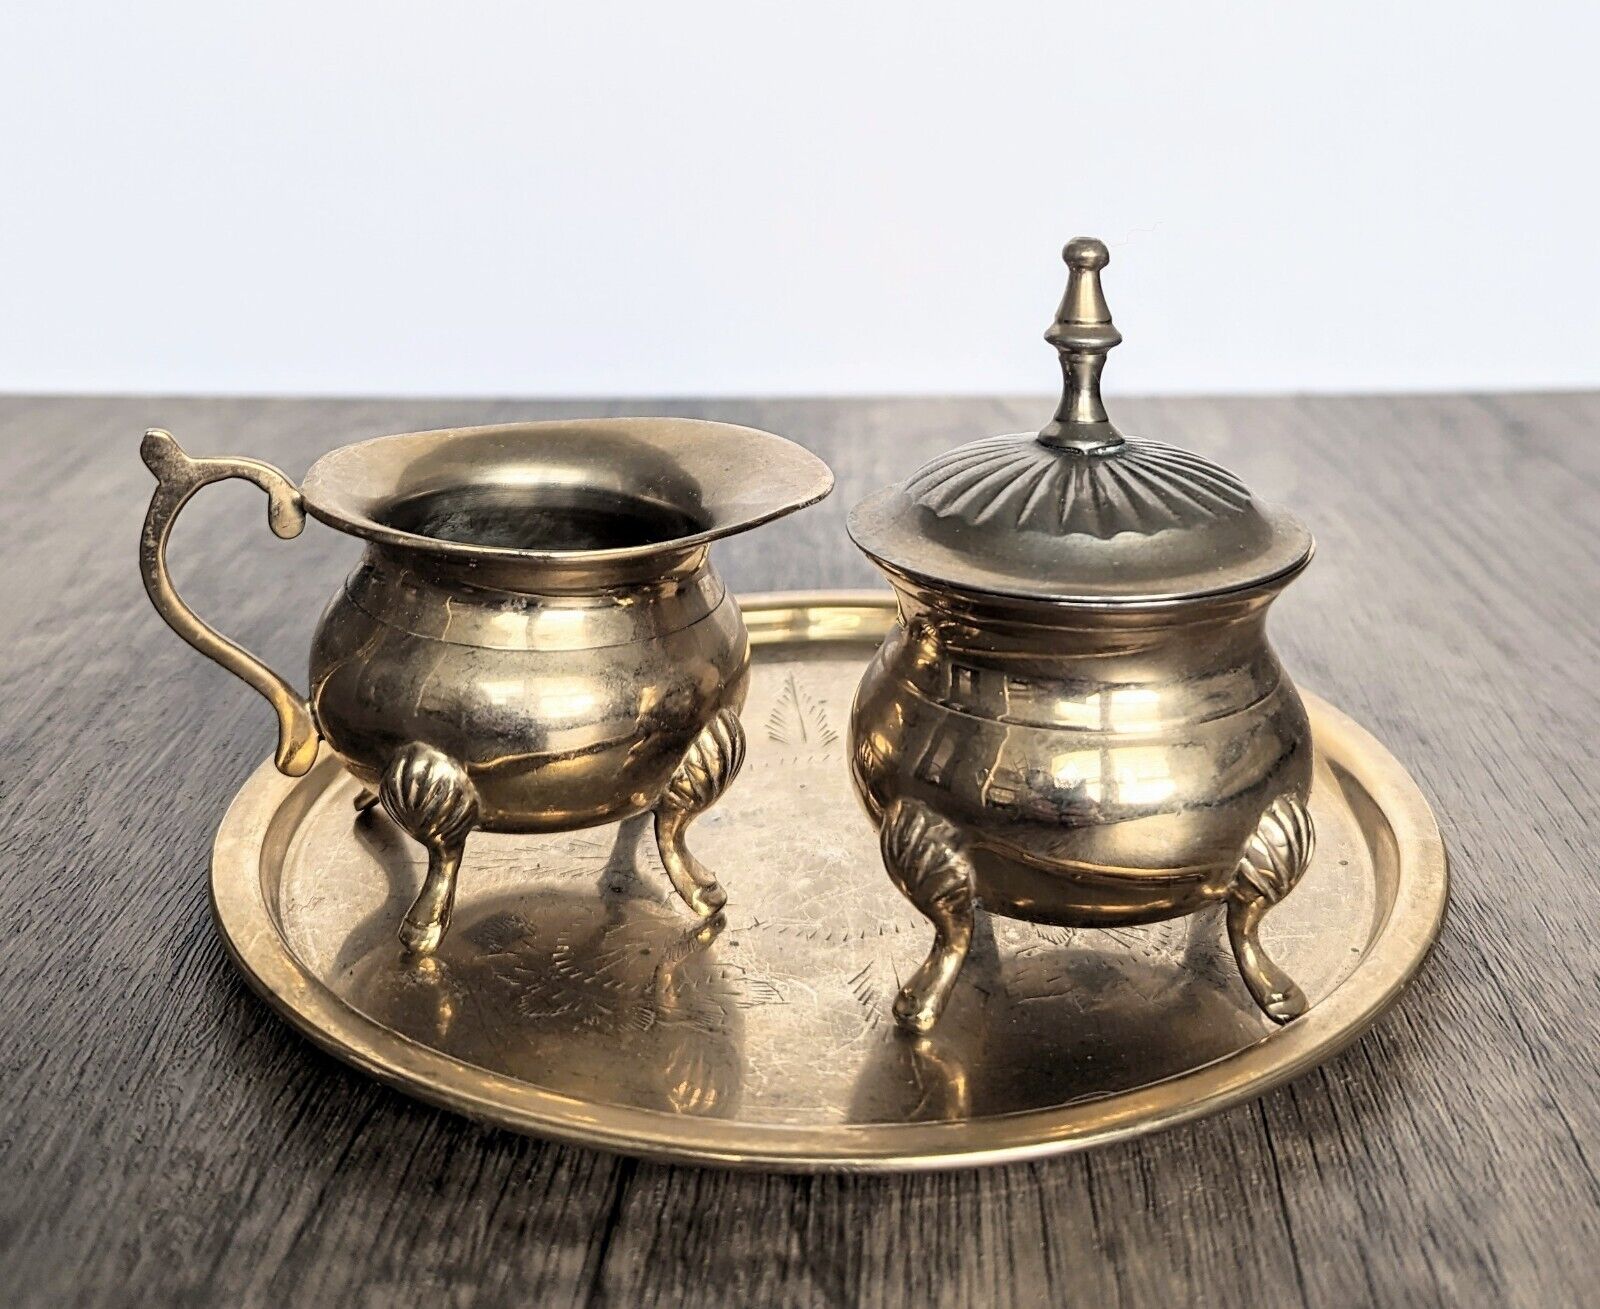 Vintage Unpolished Brass Cream Pitcher and Lidded Sugar Bowl, made in India